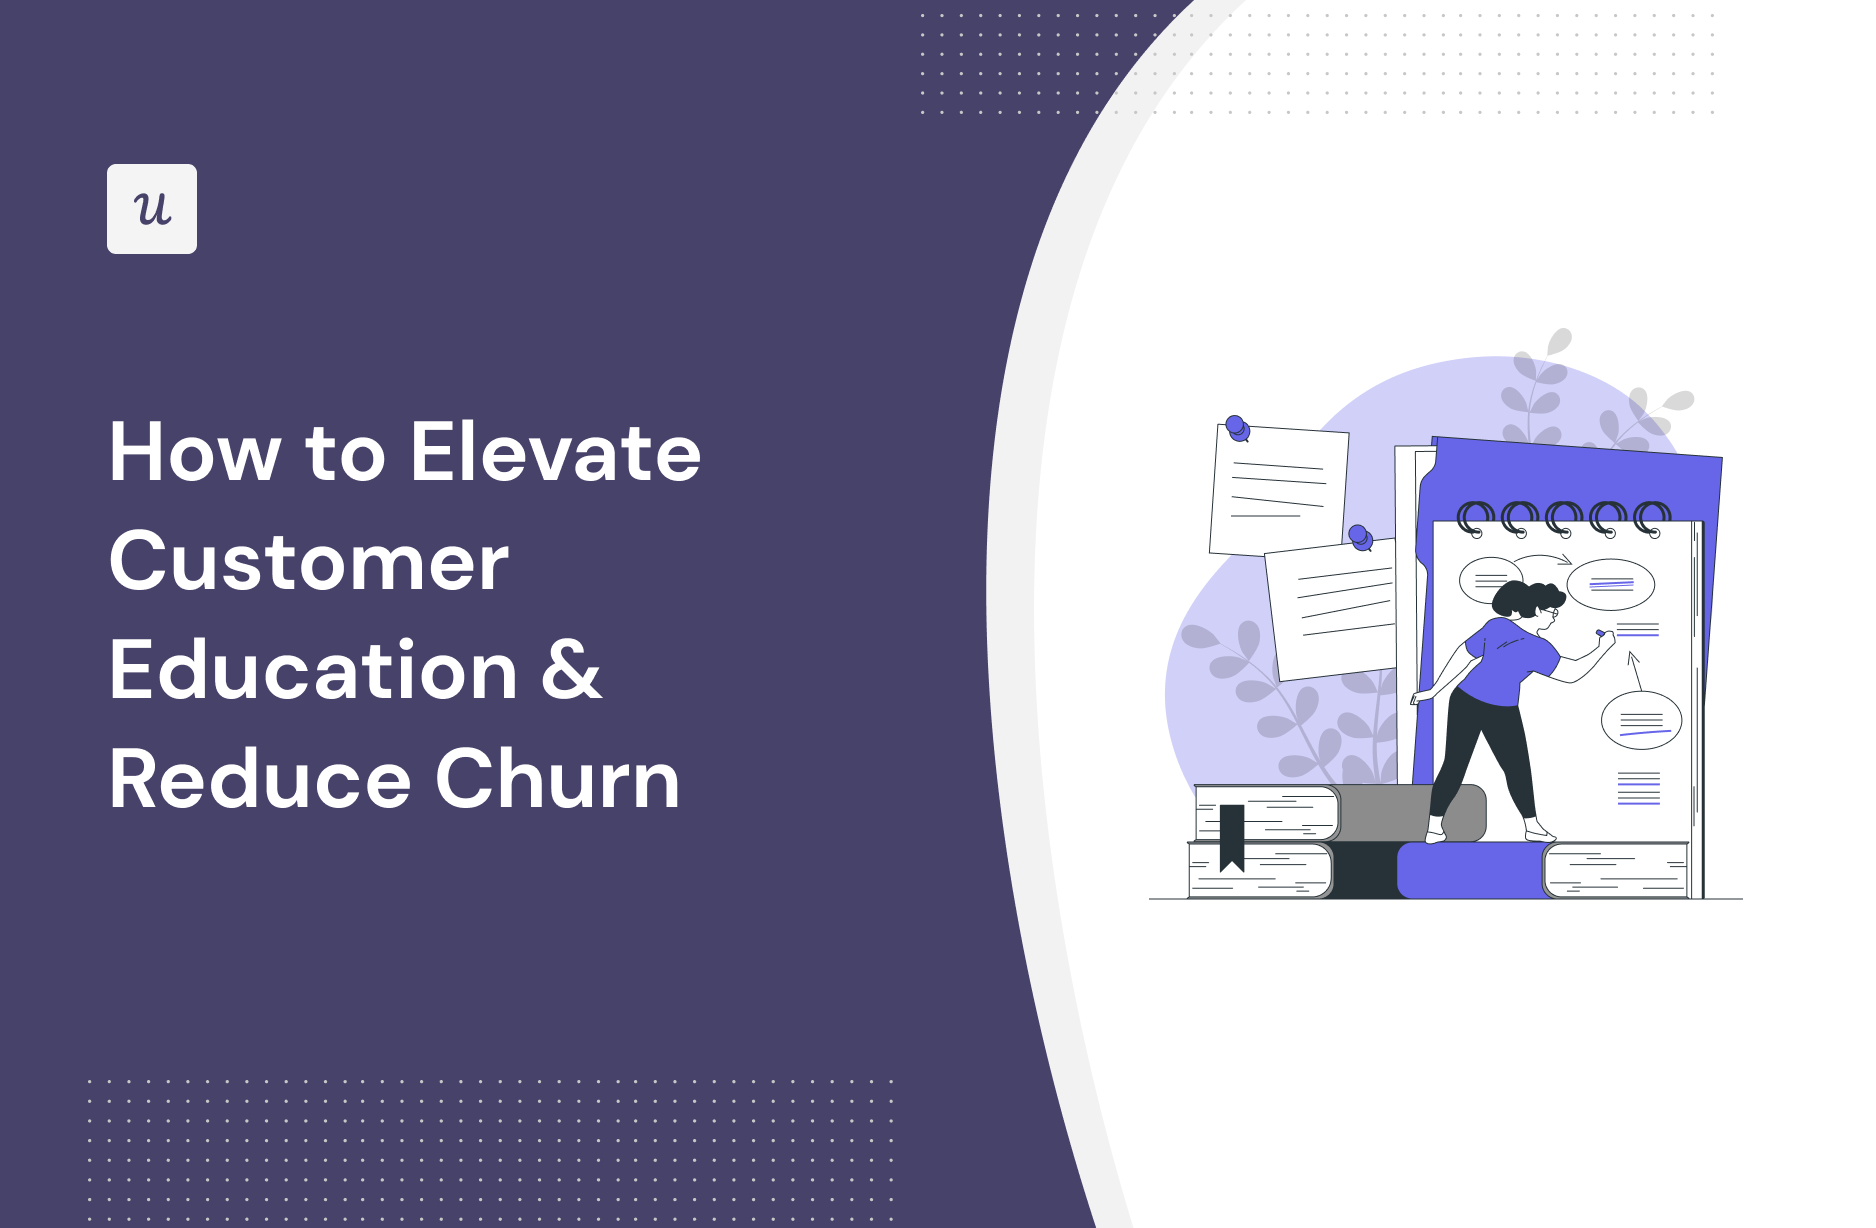 How to Elevate Customer Education & Reduce Churn